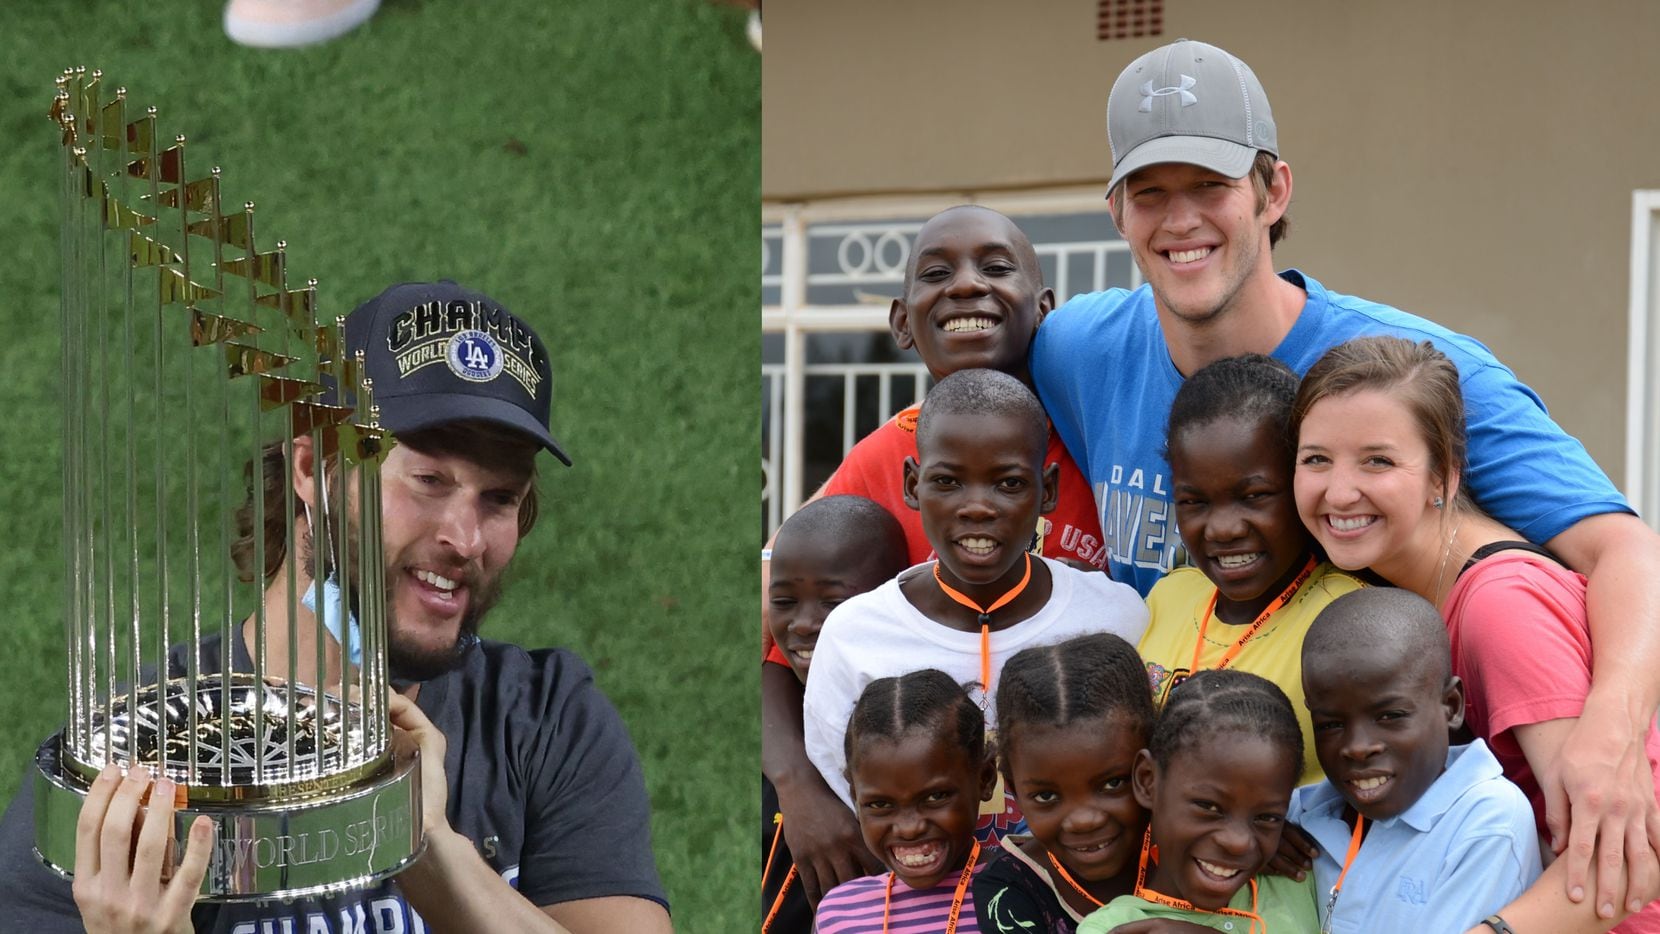 Left: Dodgers pitcher Clayton Kershaw celebrates with the Commissioners Trophy after LA defeated the Tampa Bay Rays (Photo by Maxx Wolfson/Getty Images). Right: Kershaw and his wife, Ellen, pose for a photo with a group of children in Zambia. (Courtesy of Kershaw’s Challenge)